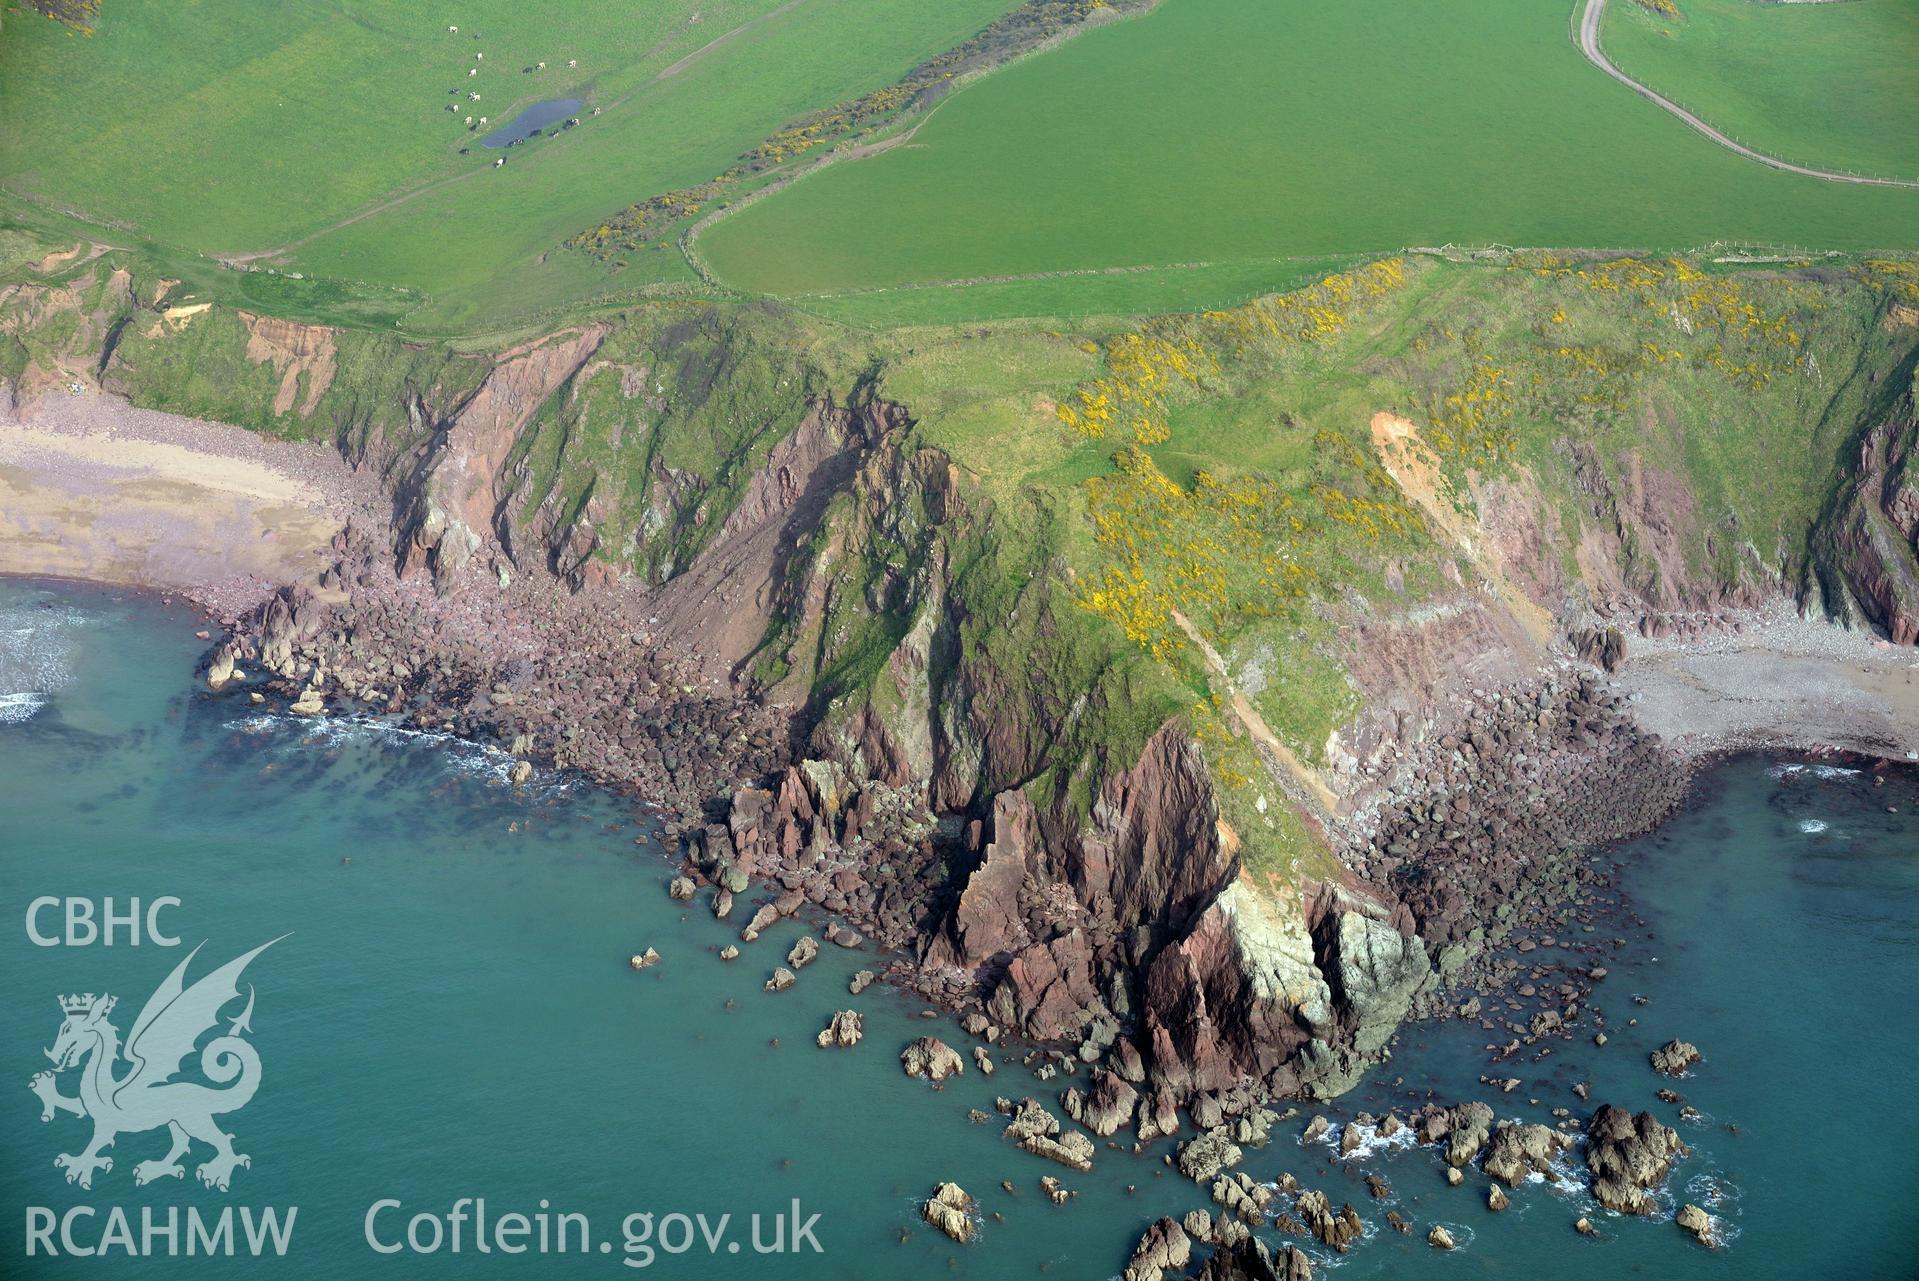 Aerial photography of Great Castle Head taken on 27th March 2017. Baseline aerial reconnaissance survey for the CHERISH Project. ? Crown: CHERISH PROJECT 2017. Produced with EU funds through the Ireland Wales Co-operation Programme 2014-2020. All material made freely available through the Open Government Licence.